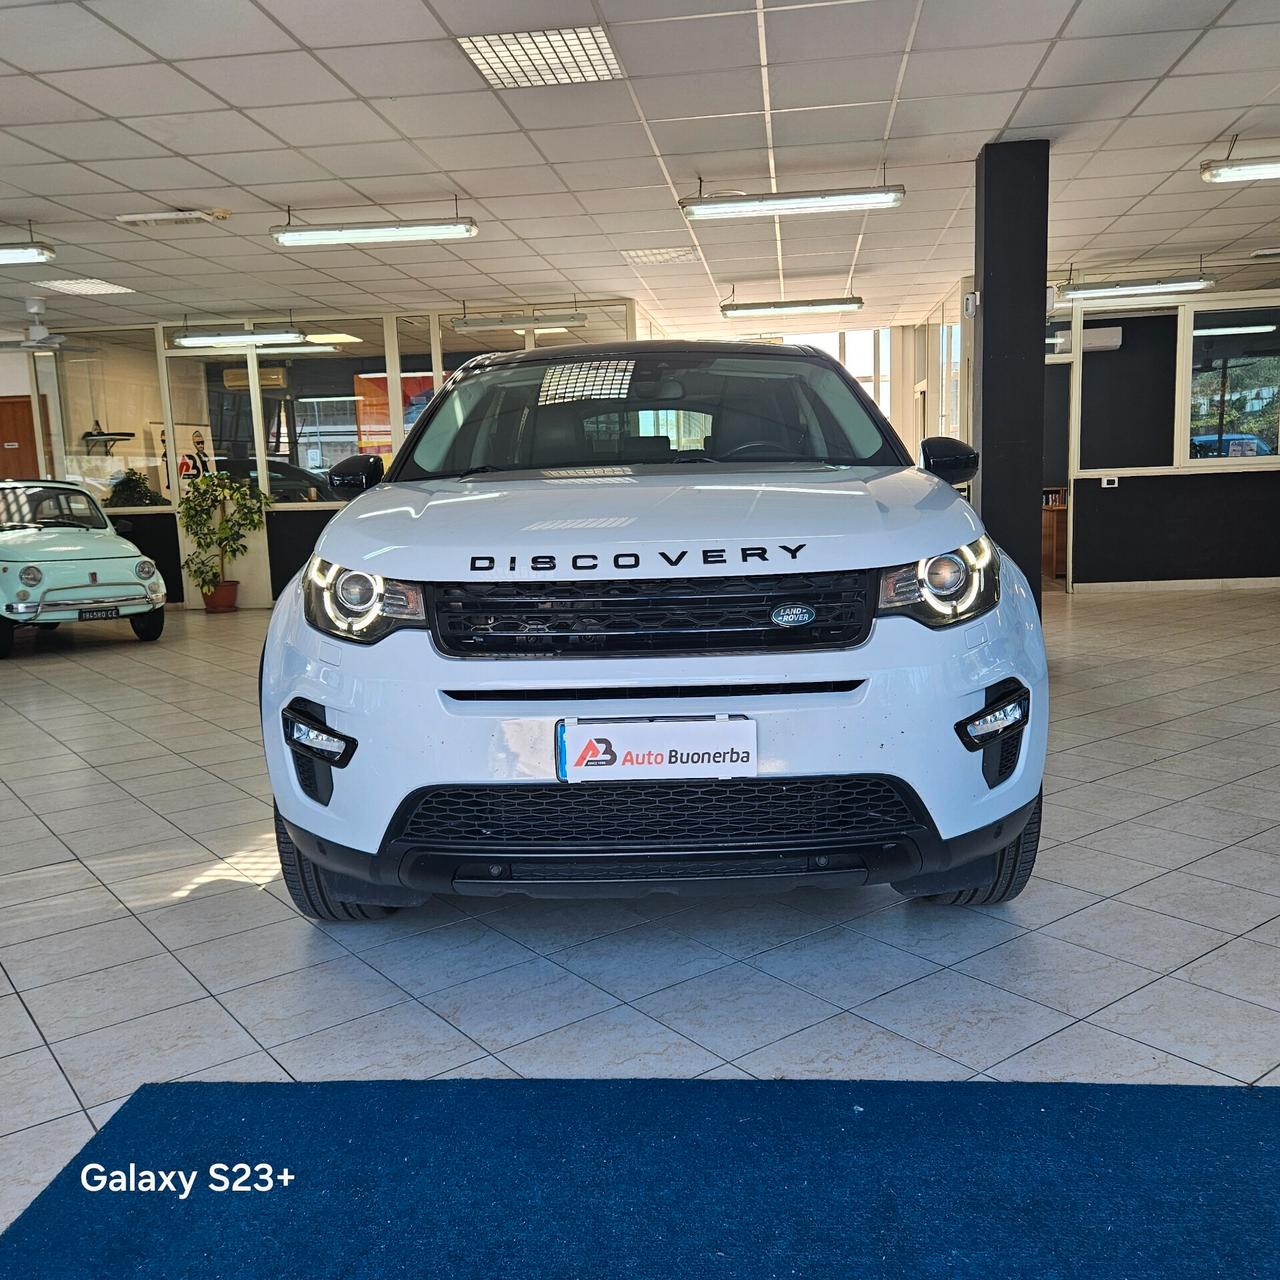 Land Rover Discovery Sport Discovery Sport 2.0 TD4 180 CV Auto Business Edition Premium